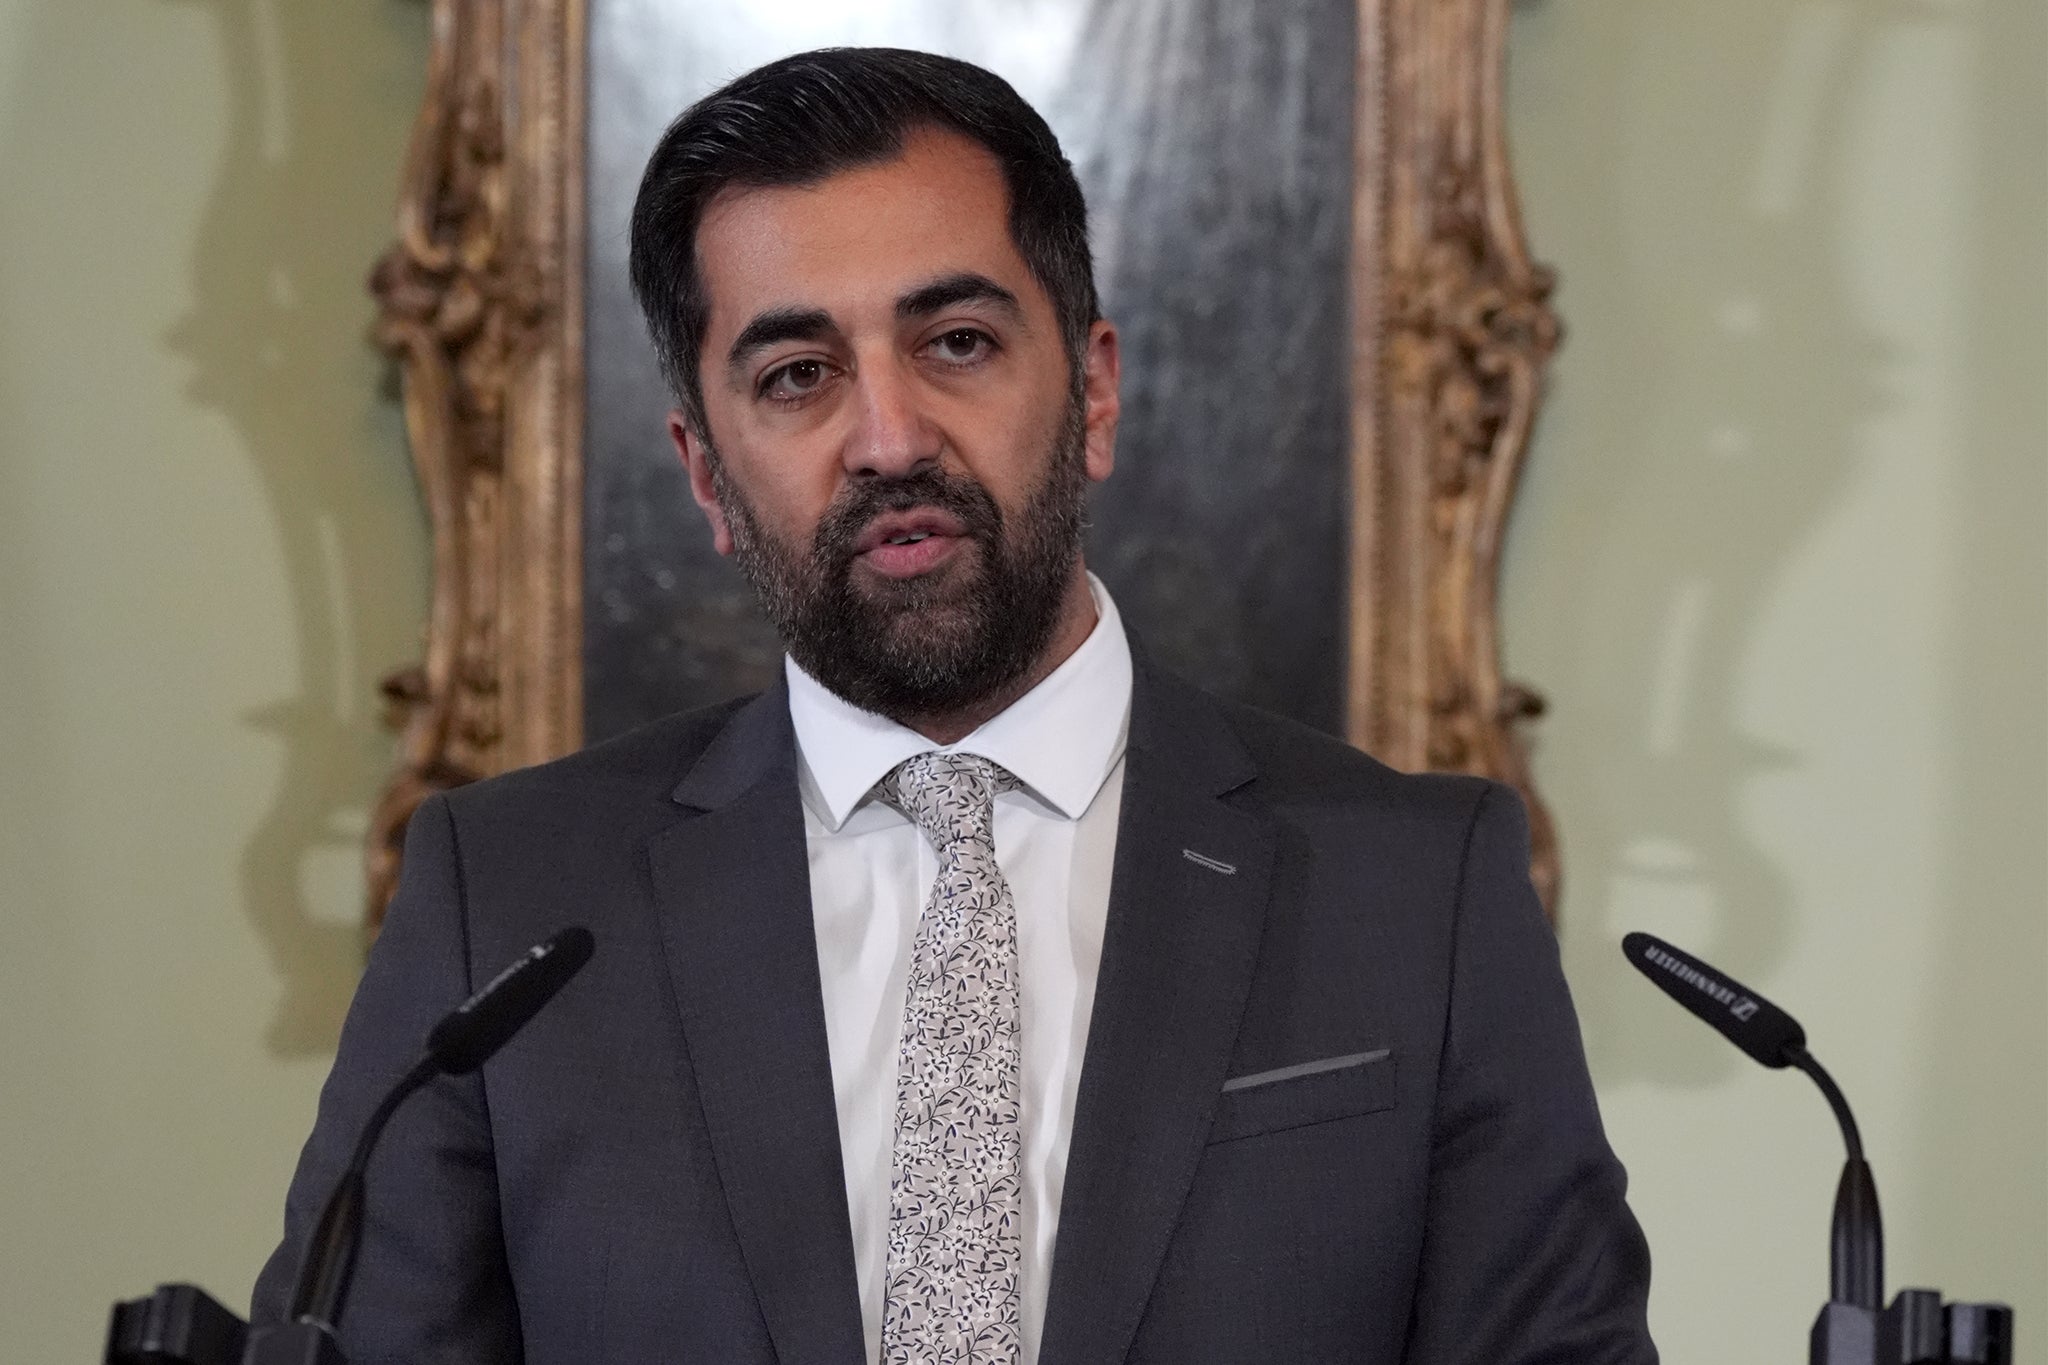 Now, after a miserable year as first minister, the man dubbed ‘Humza Useless’ has resigned